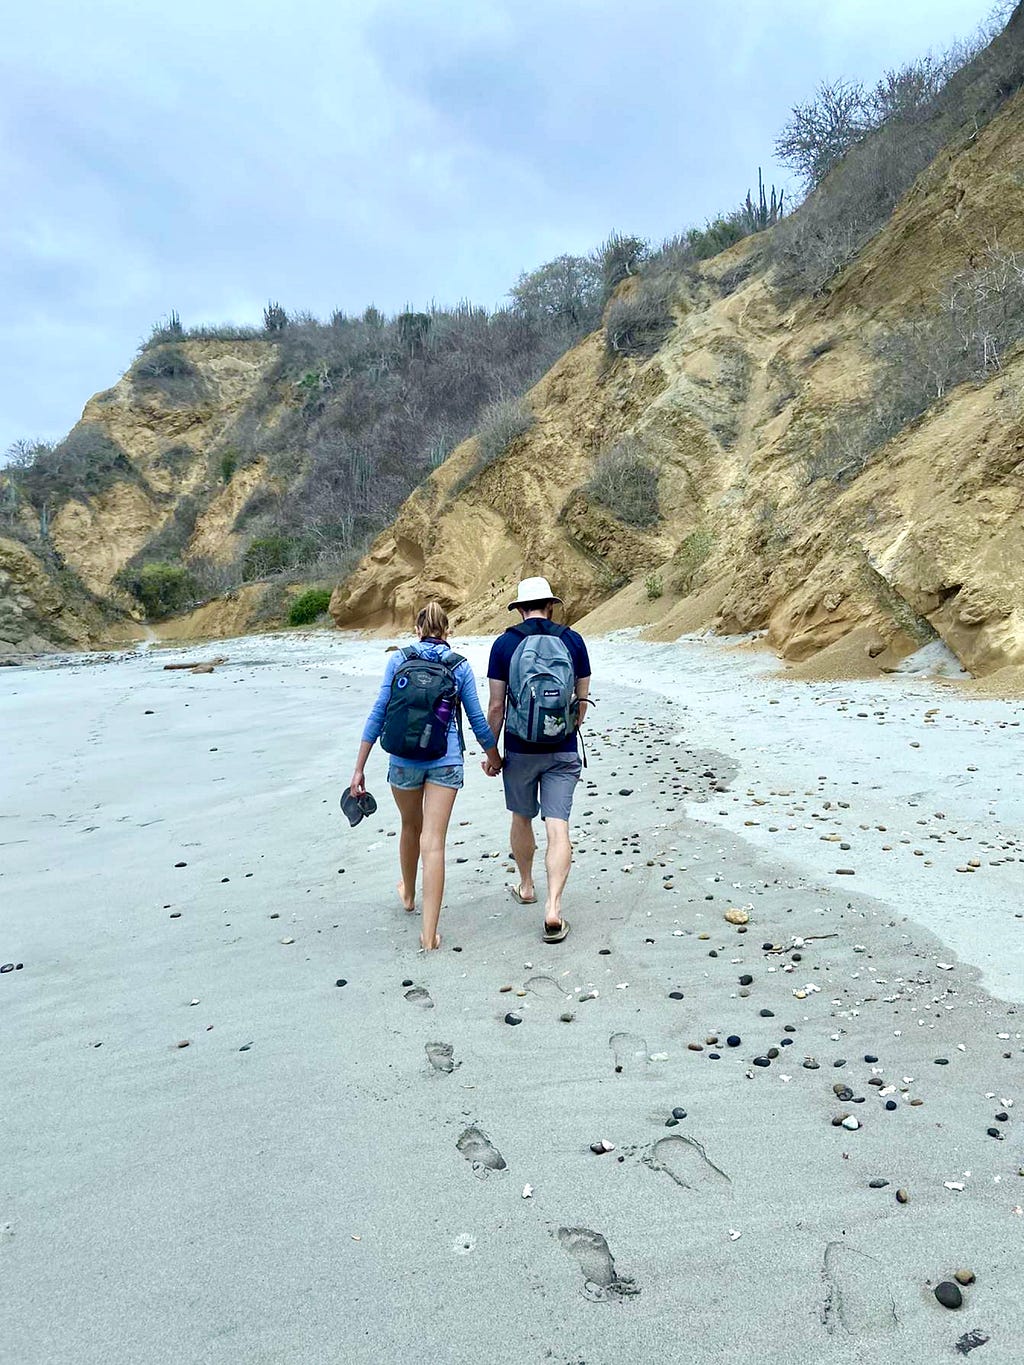 A couple holding hands walk with their backs to the camera on a sandy beach. Cliffs sit to their right with little vegetation